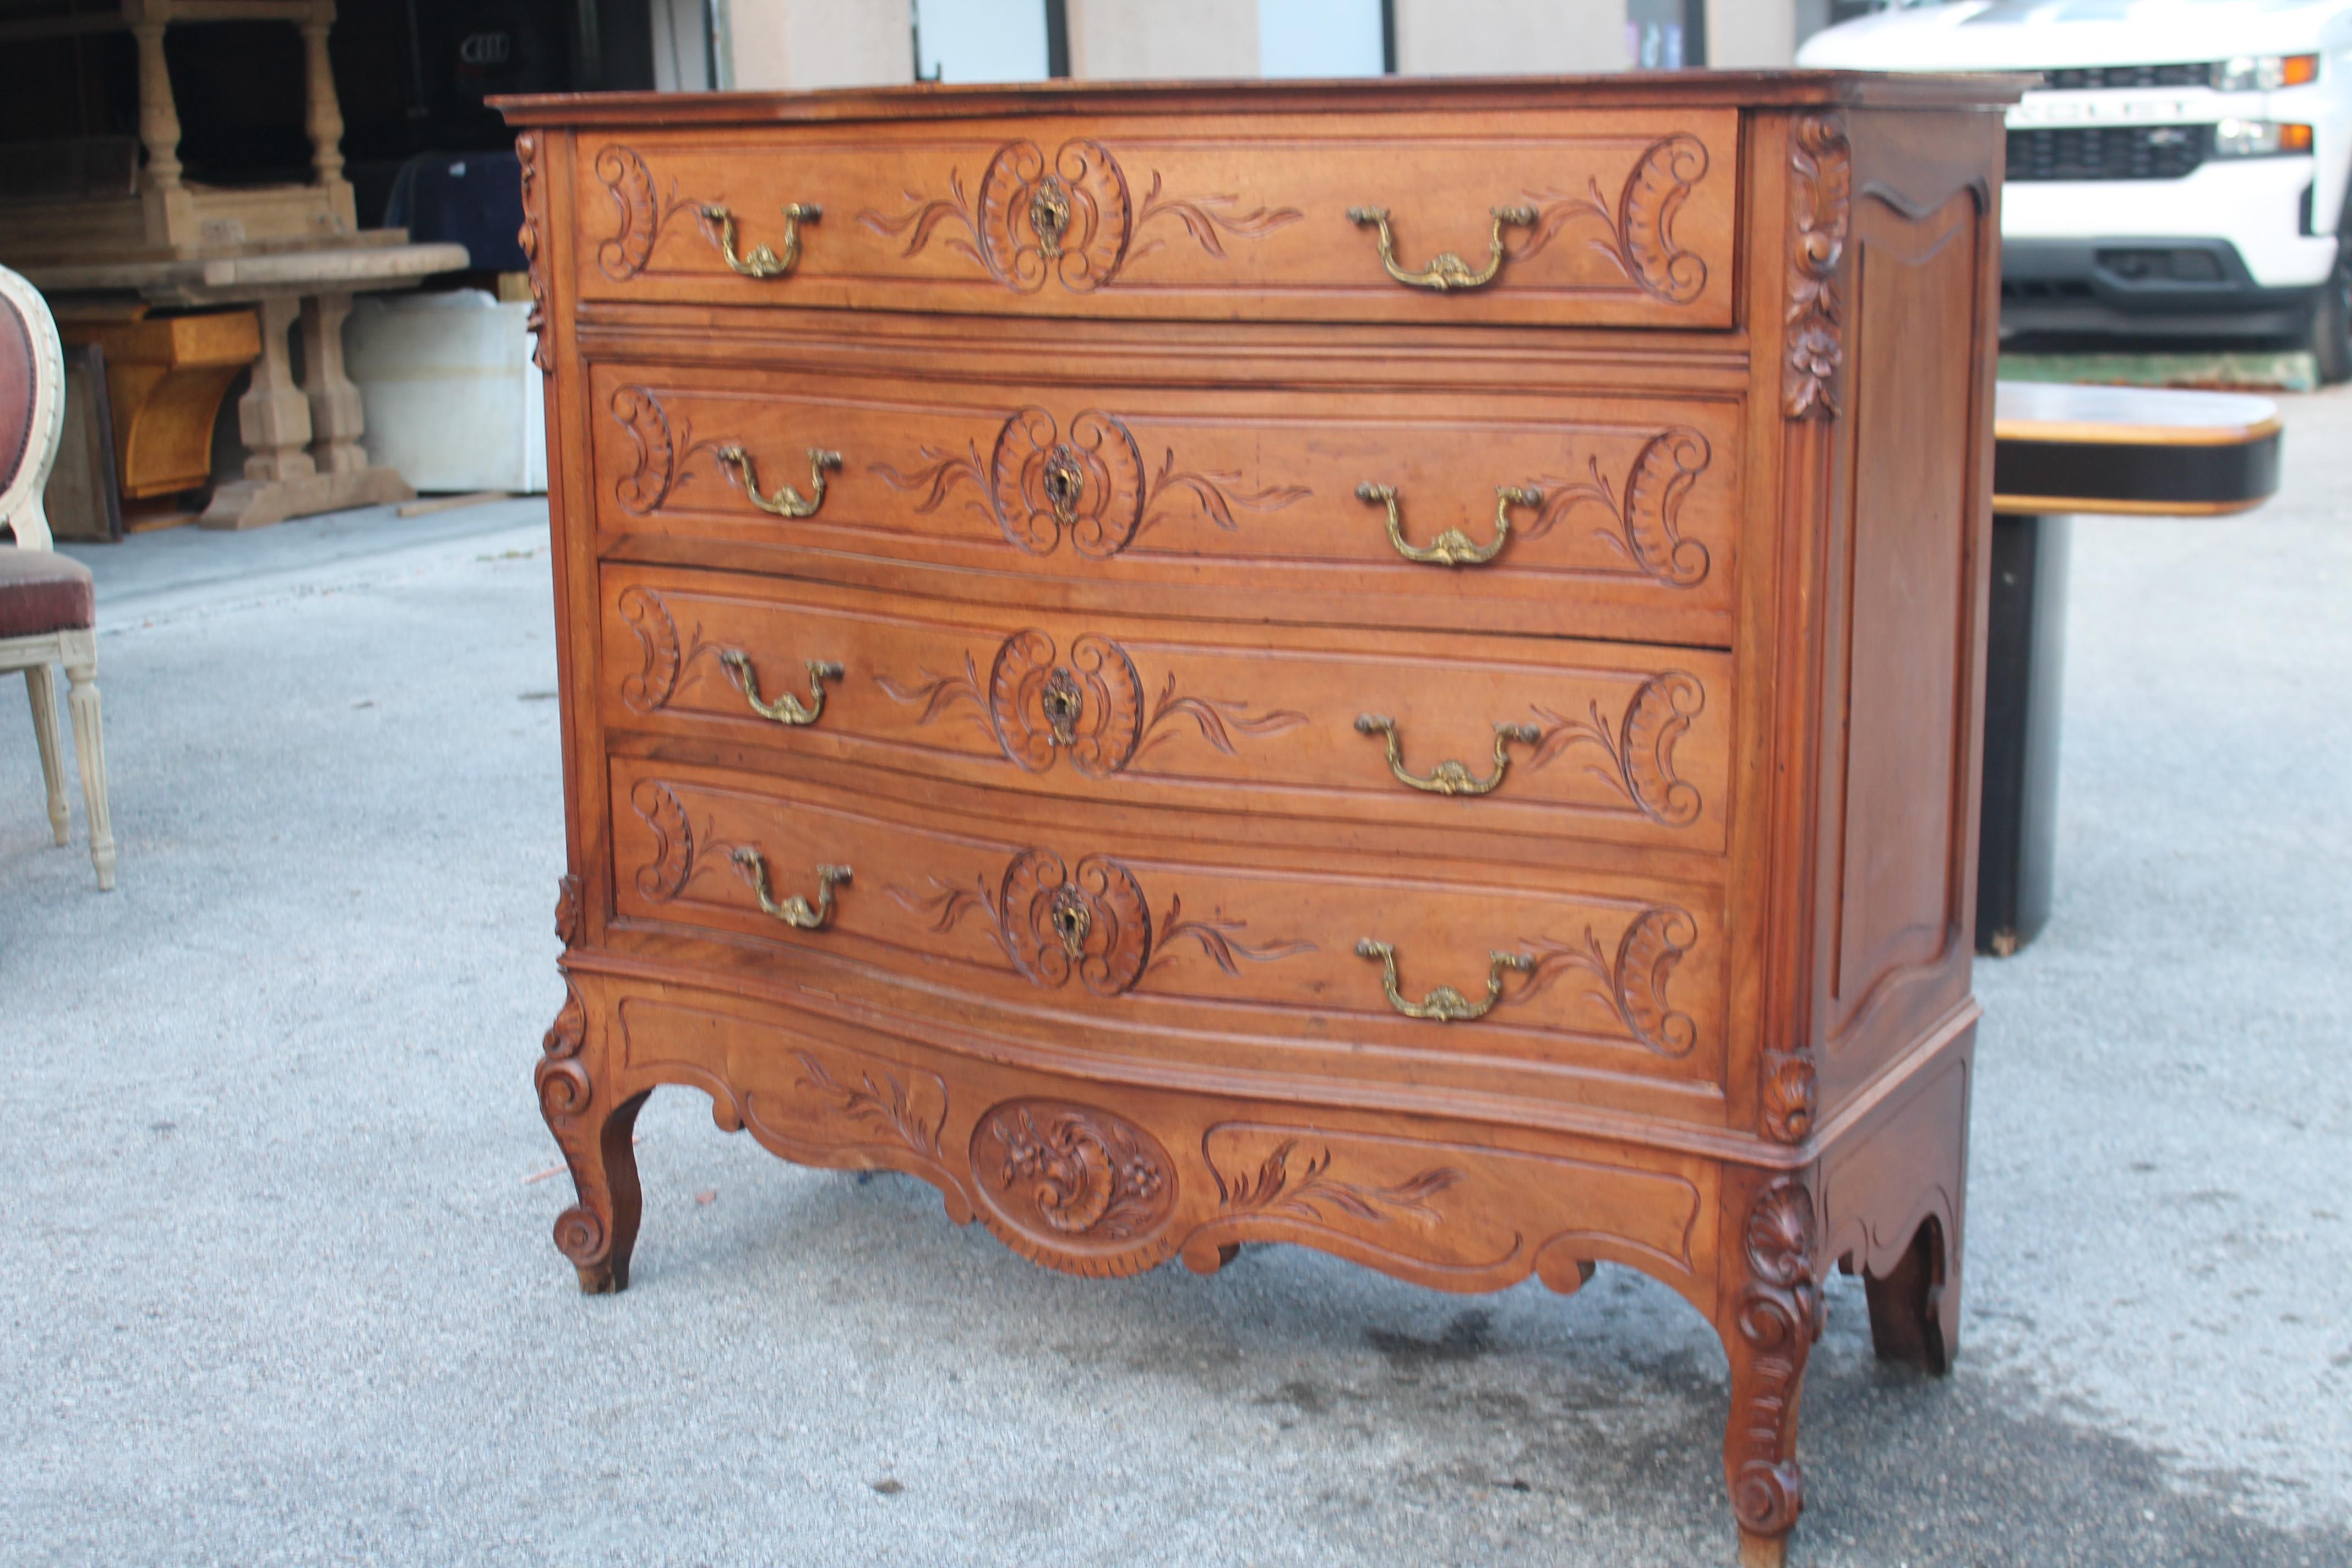 19thc French Louis XVI style Carved Walnut Chest of Drawers/ Dresser. 4 Drawers. 